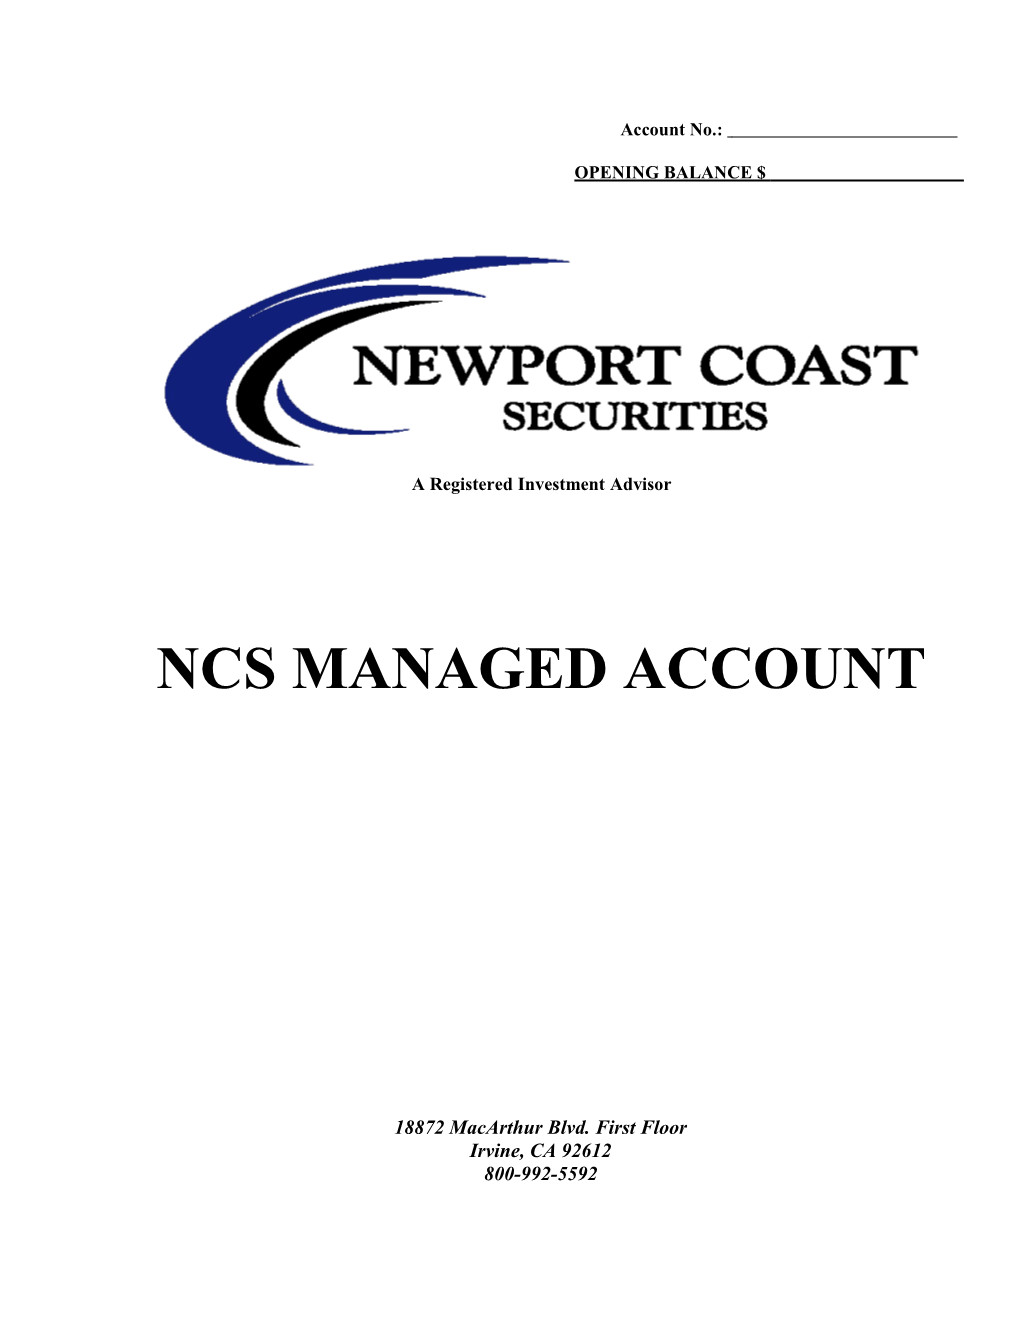 NCS Managed Account Agreement-Penson 052410